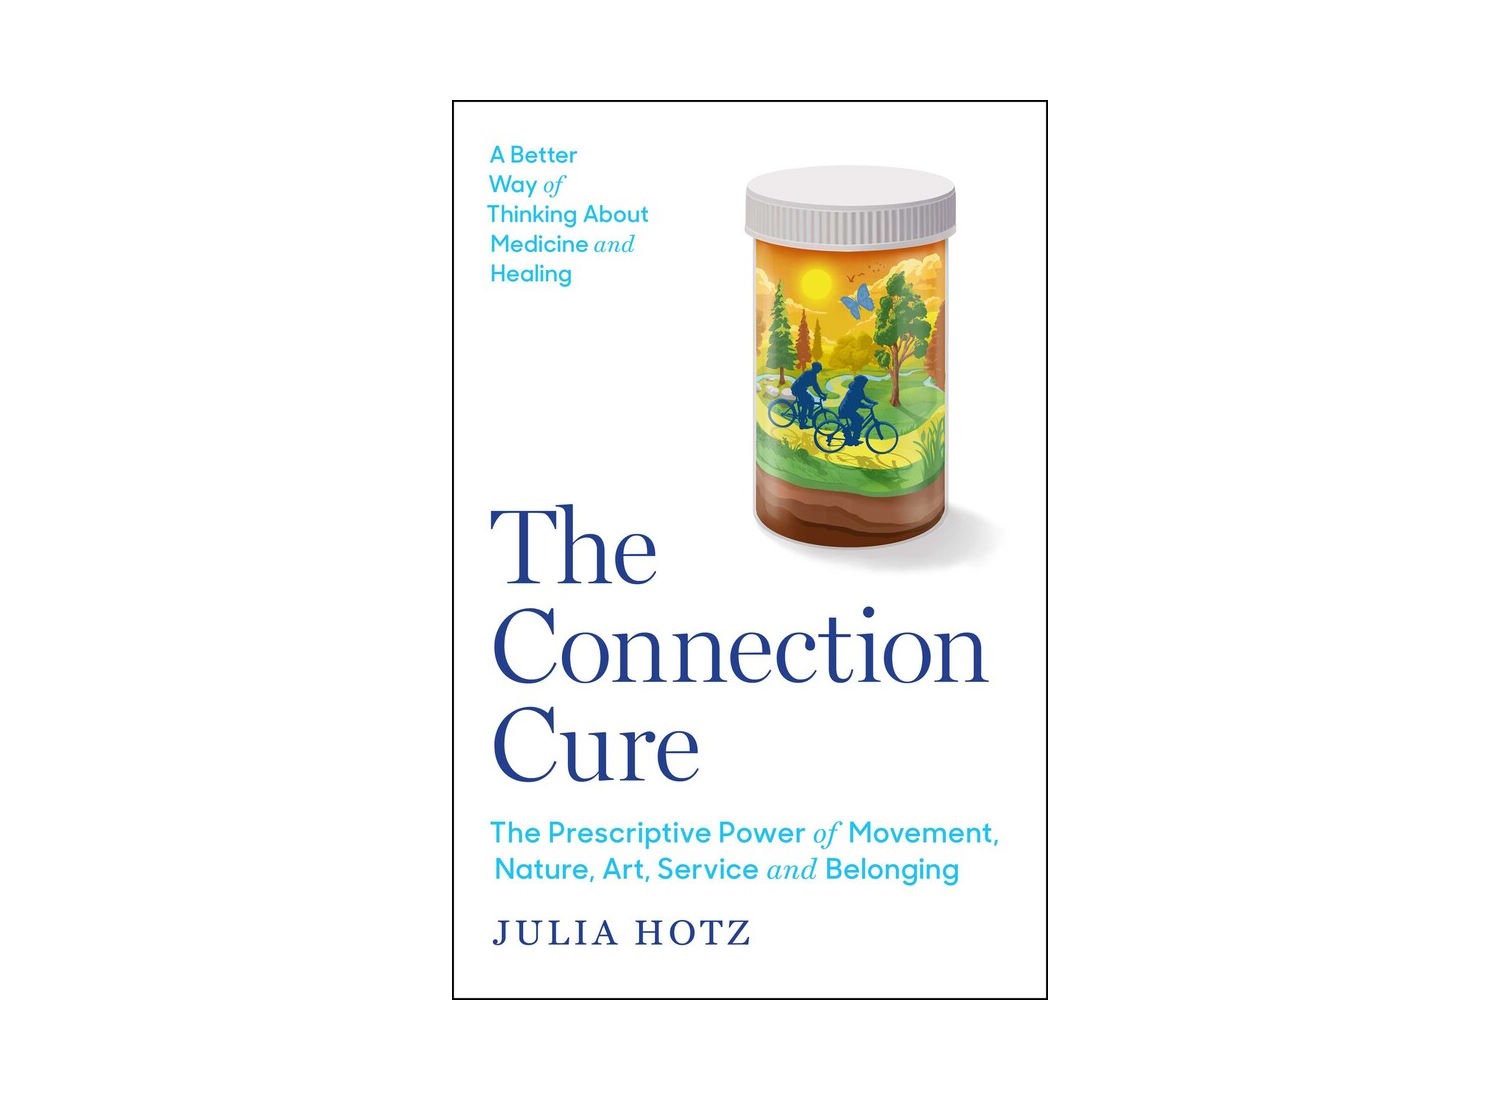 The Connection Cure: A Worldwide Social Prescribing Book Reporting Tour to Rediscover What Matters